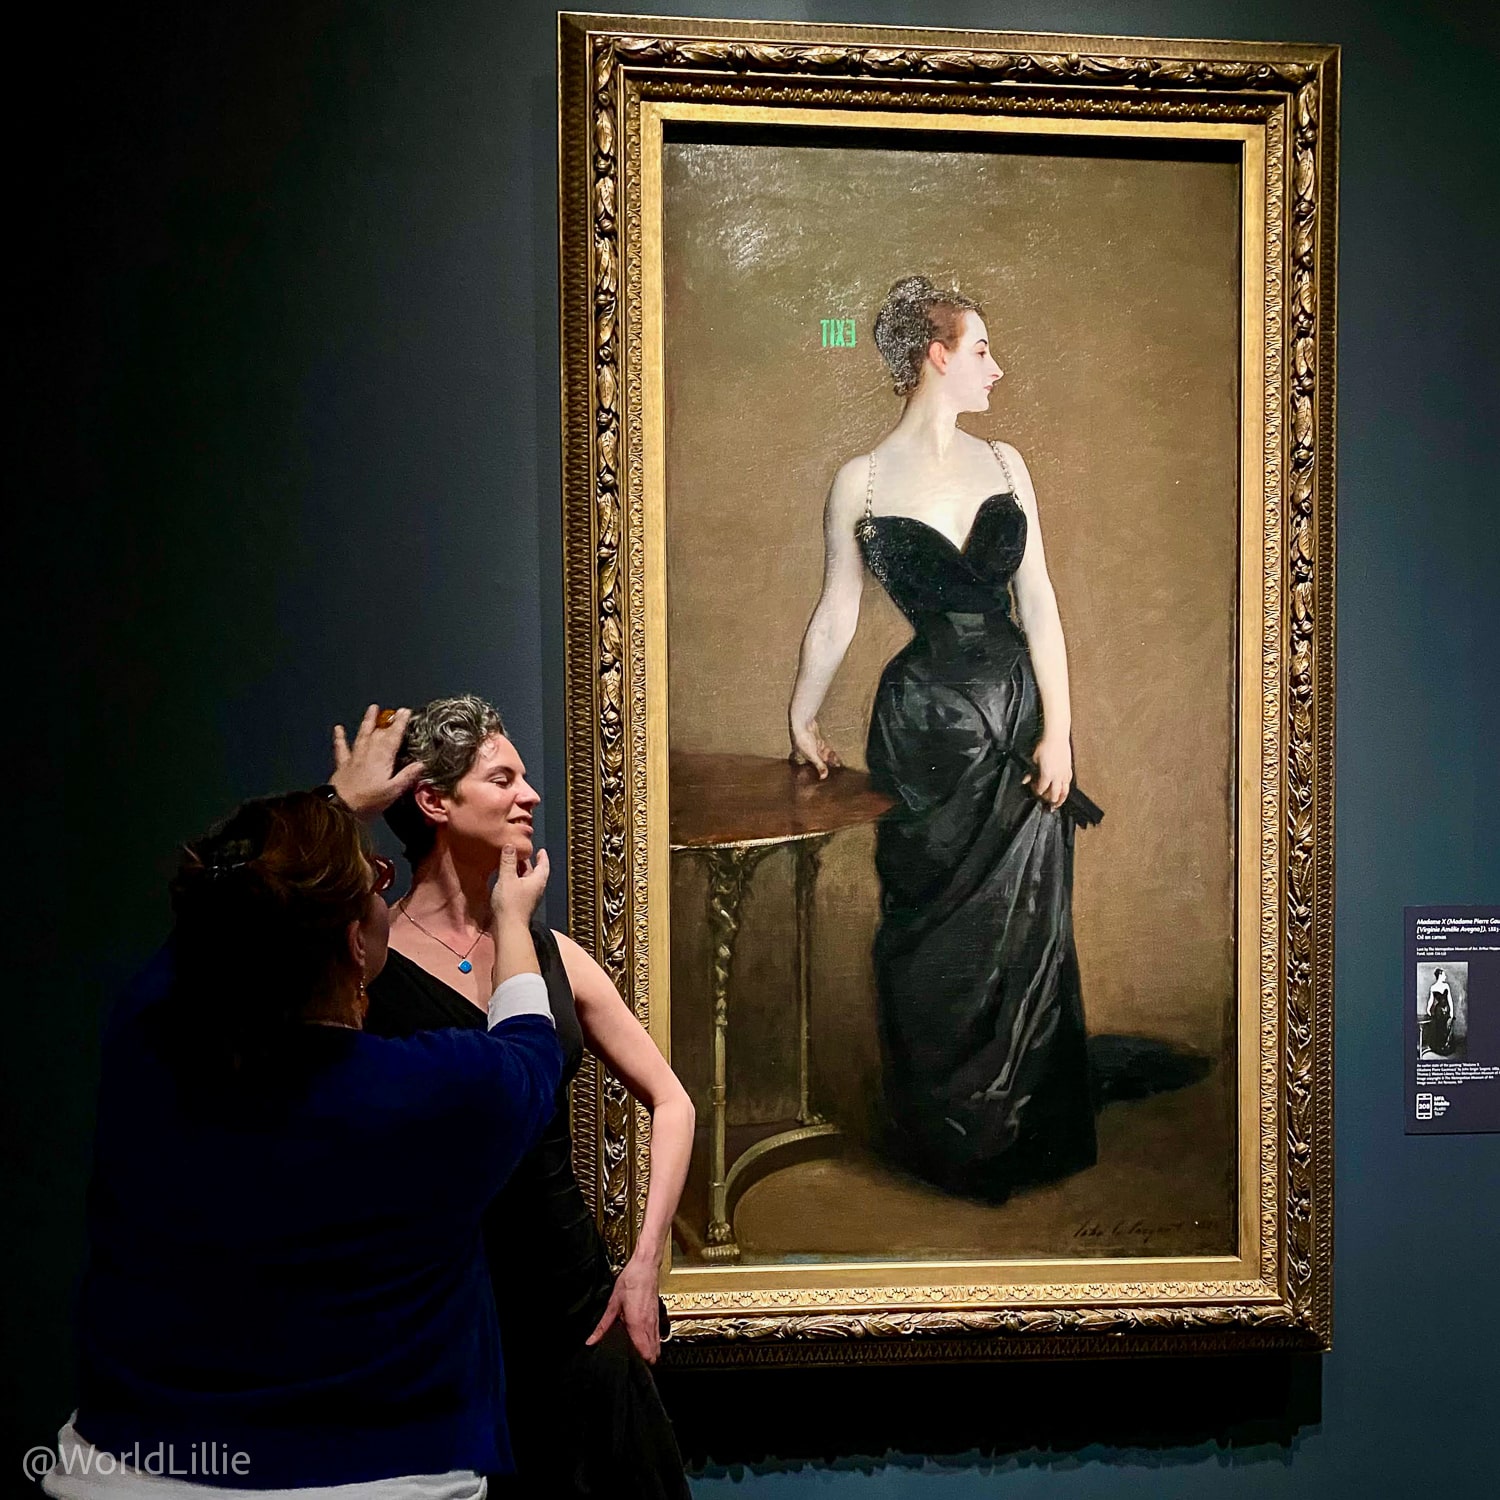 Me being "sculpted" by a friendly stranger to pose like Sargent's "Madame X."